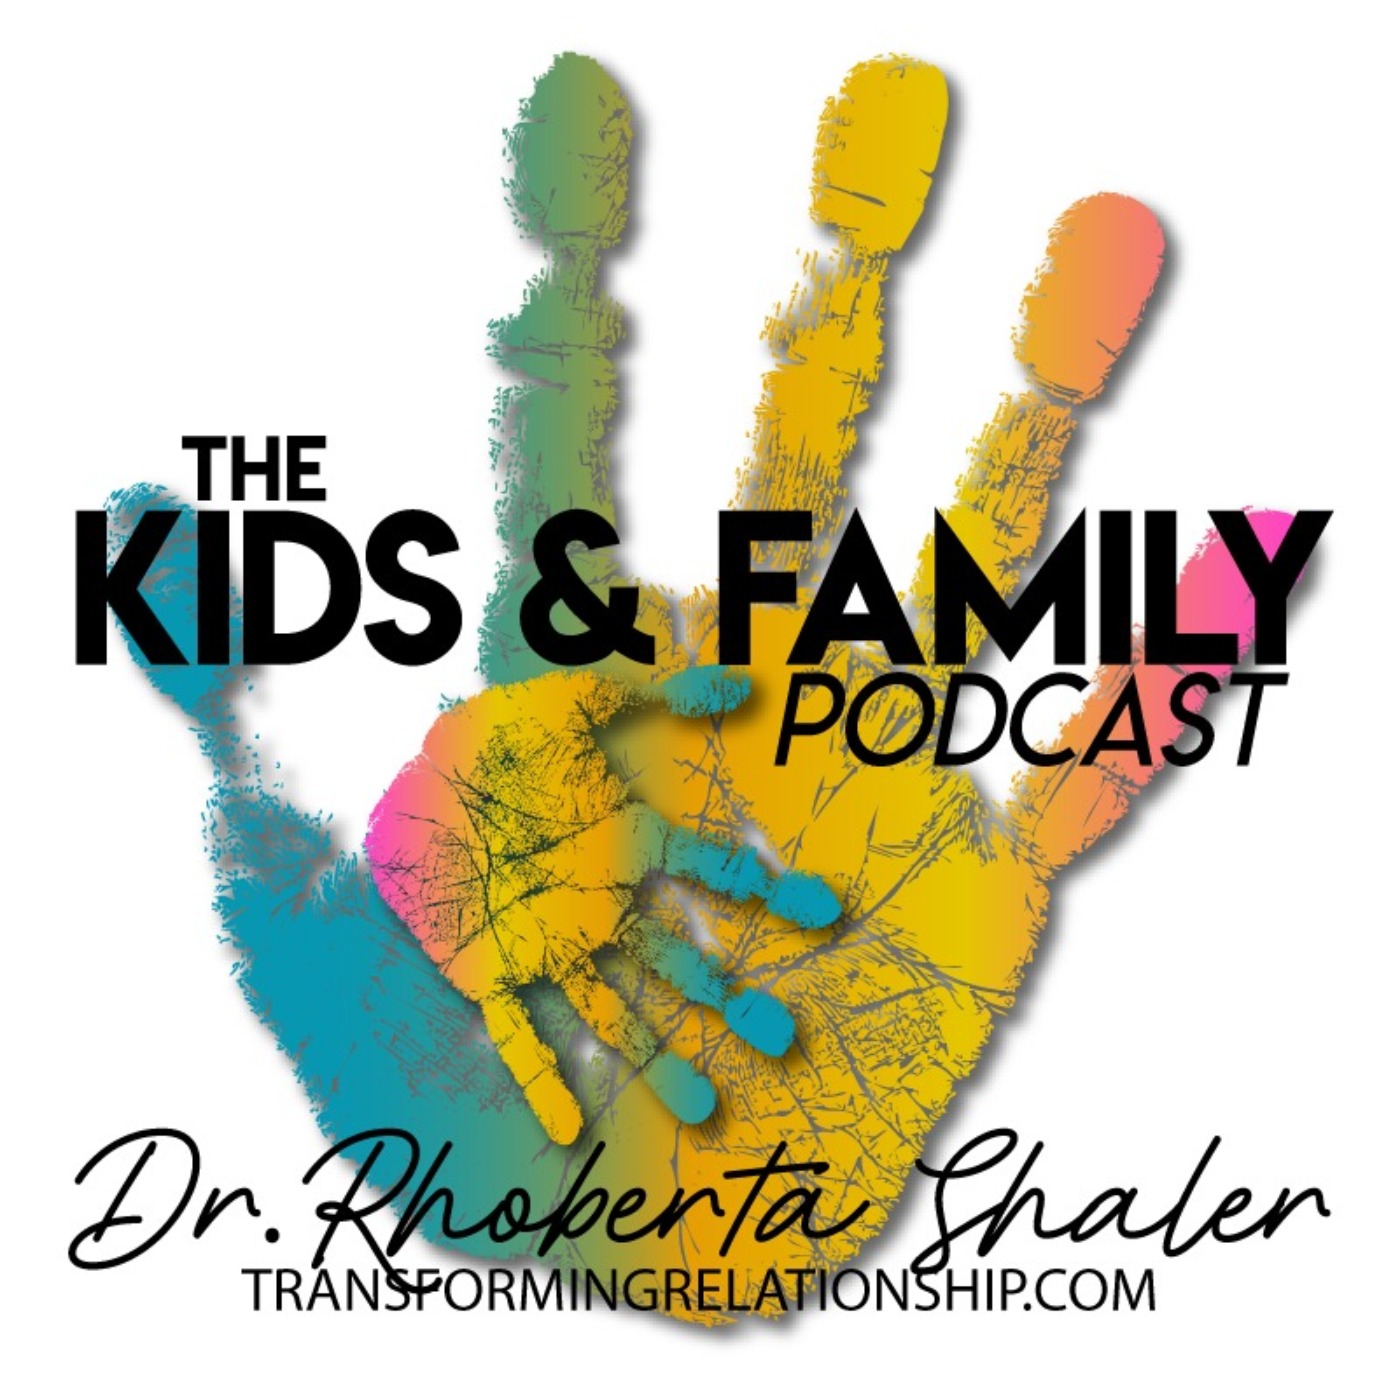 The Kids & Family Podcast